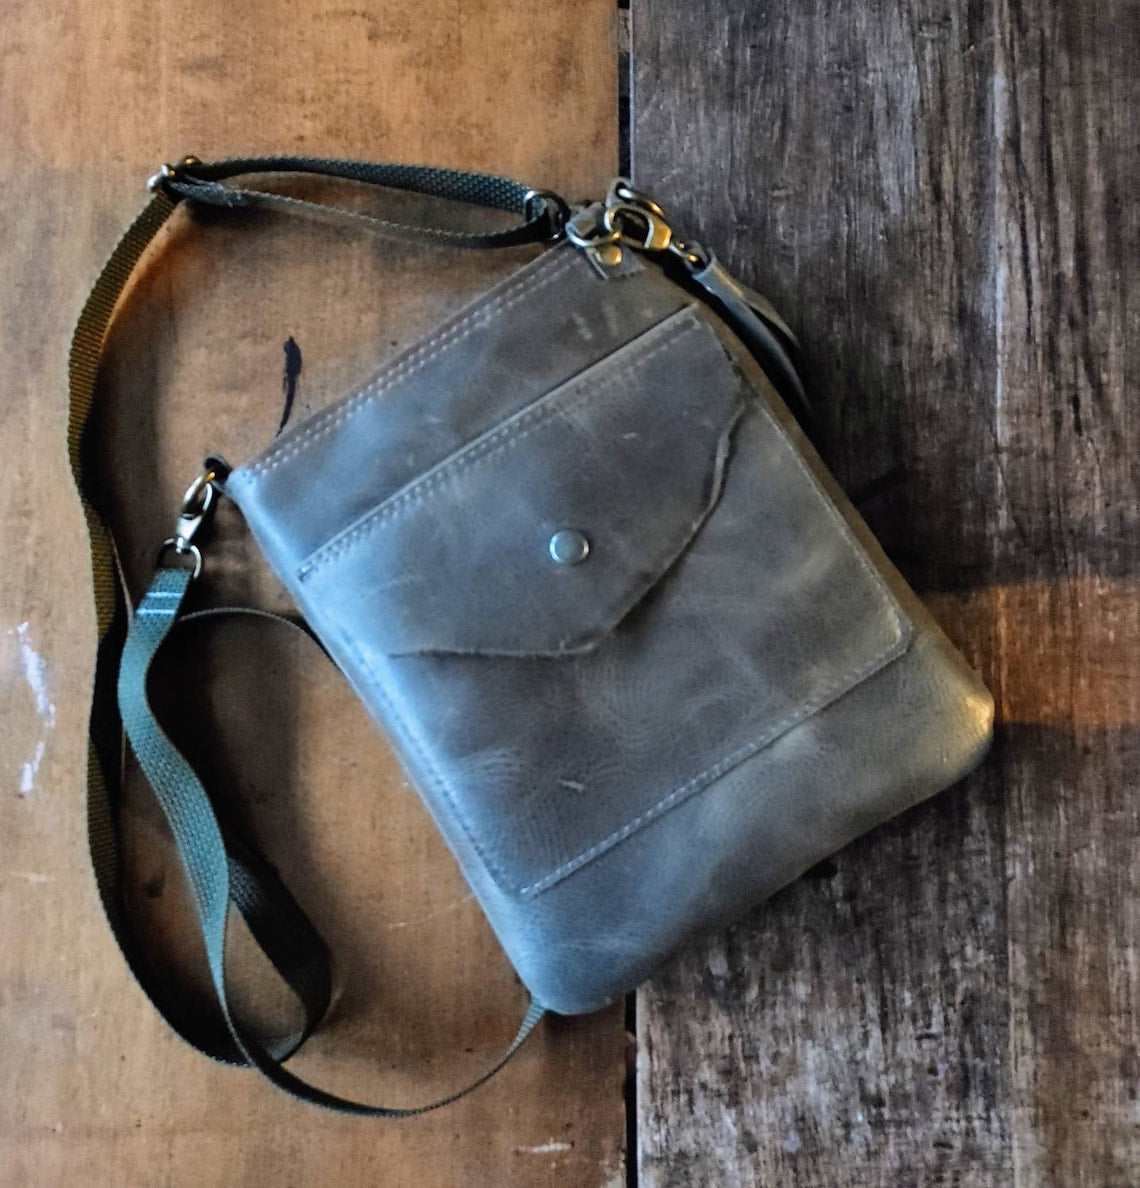 Leather Crossbody Bag with Lots of Pockets. Good for a Man Bag